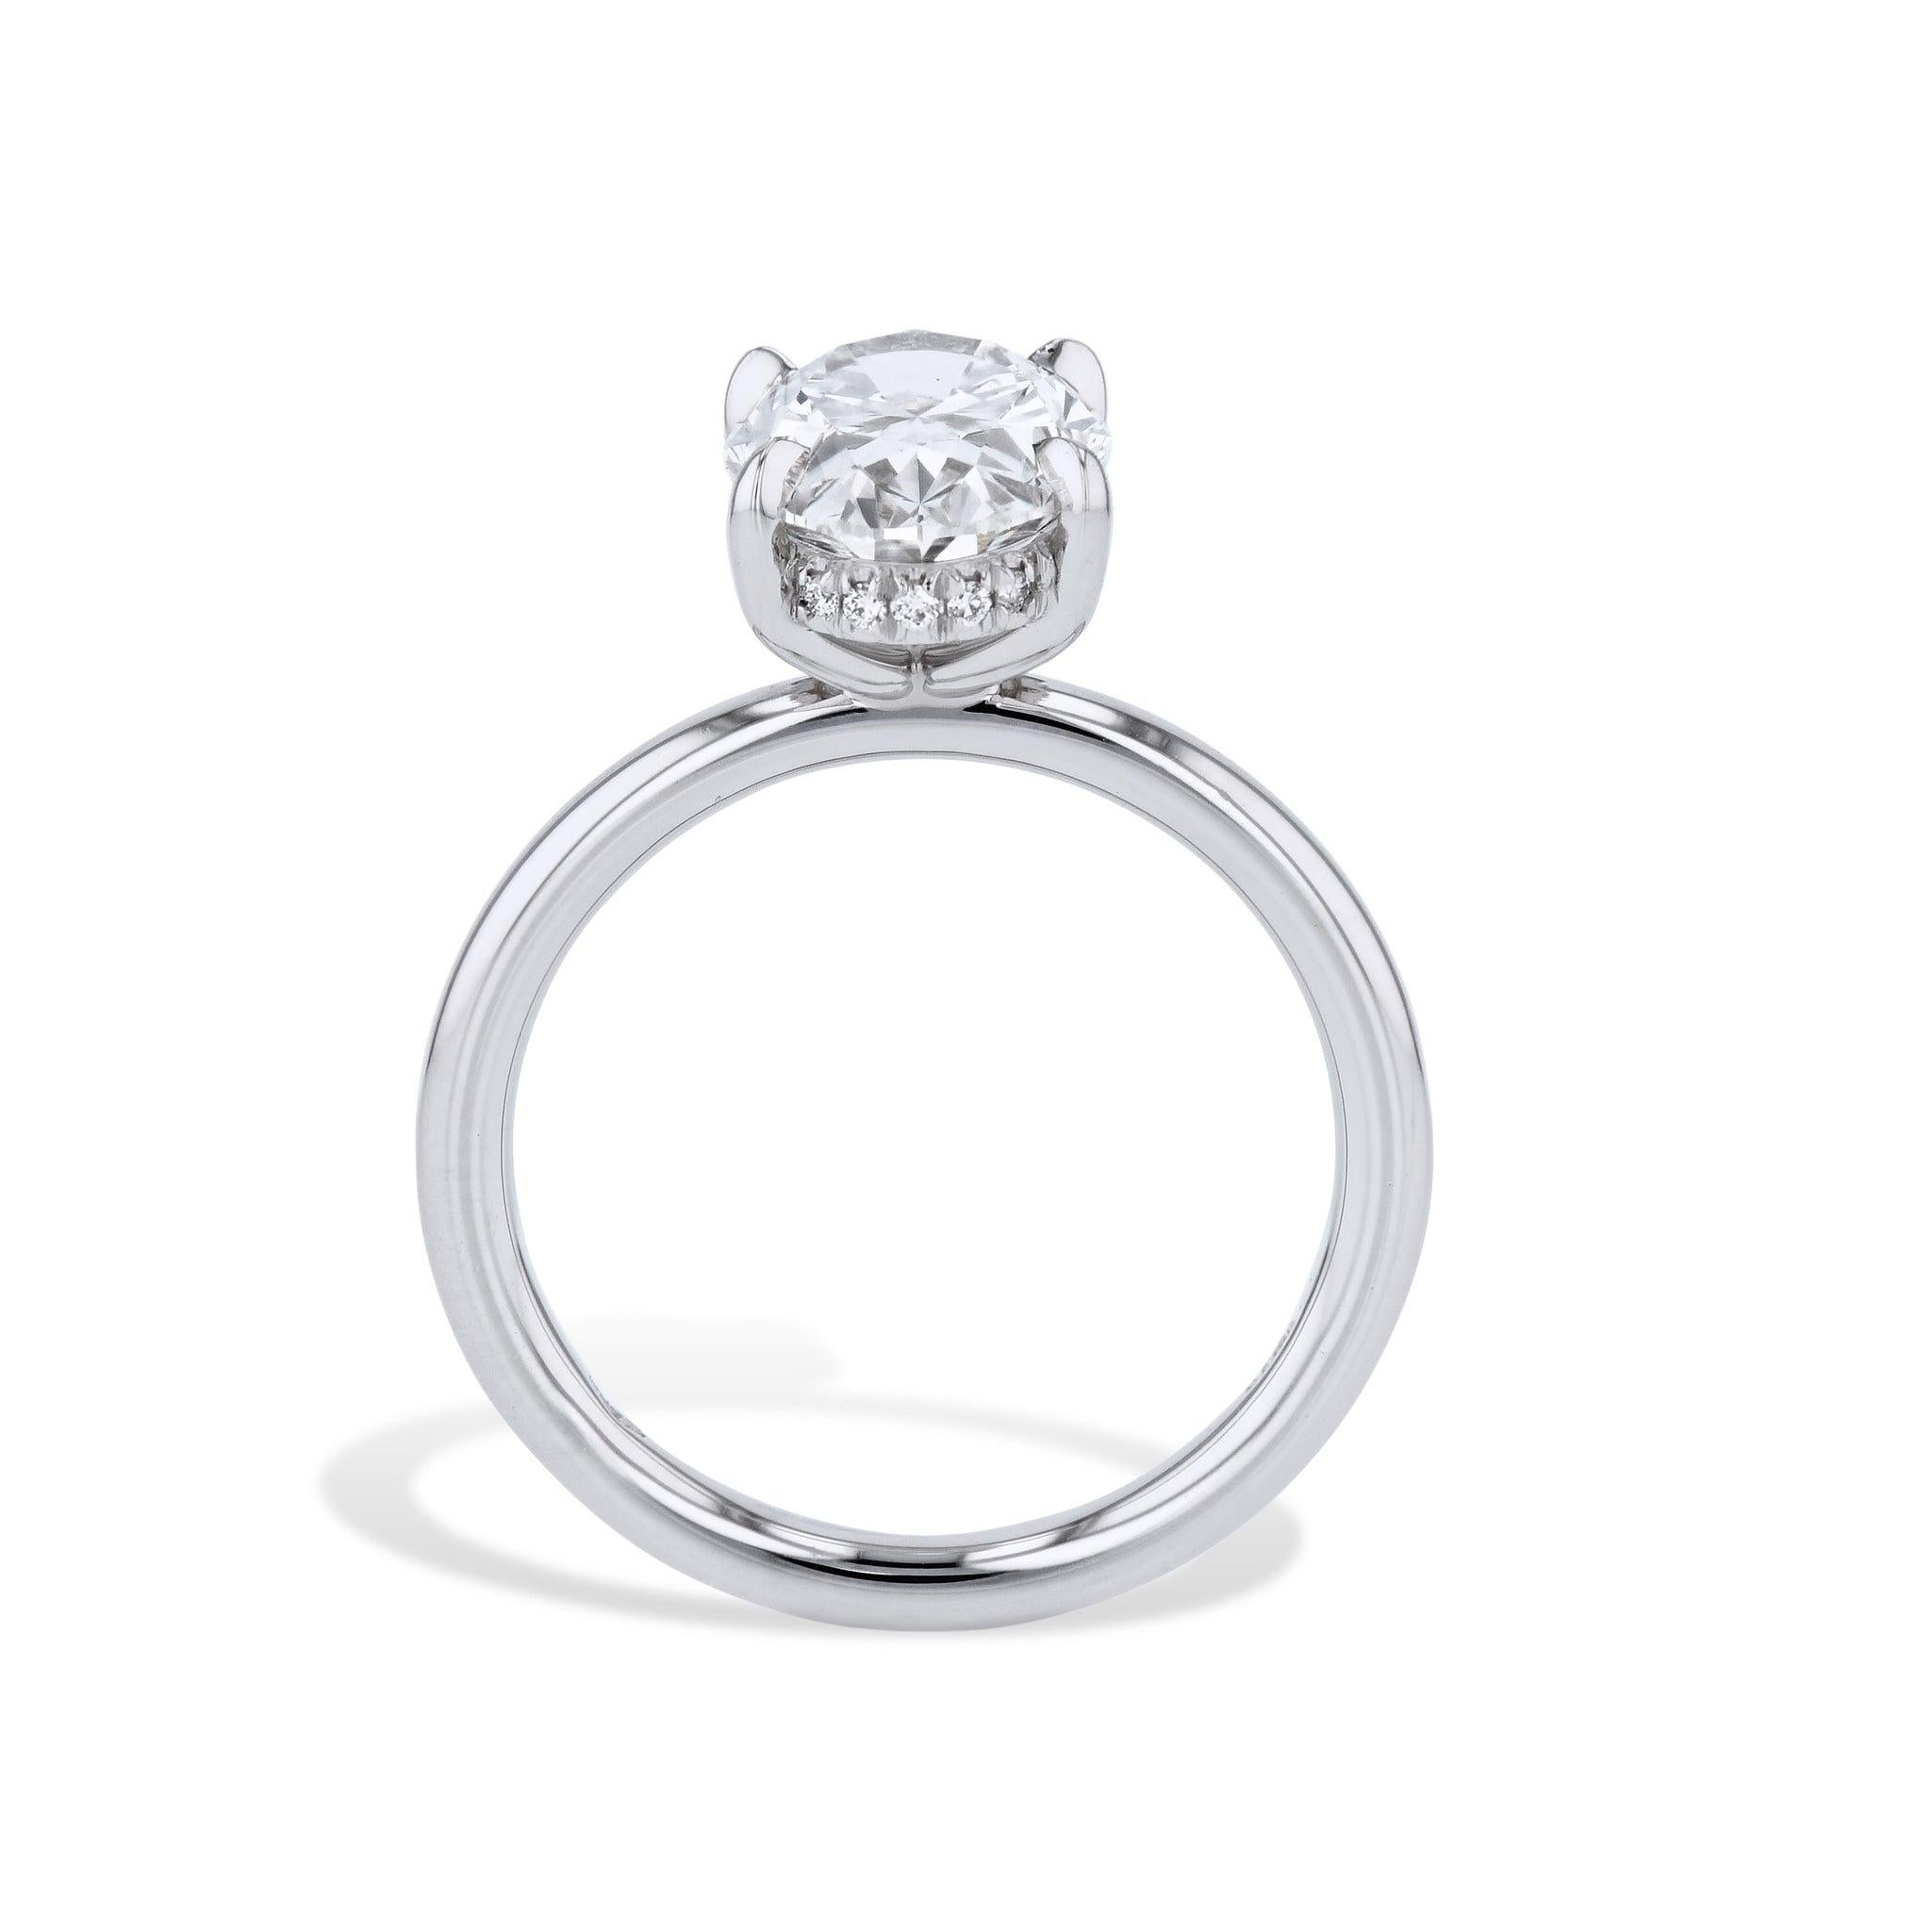 This extraordinary 3.01 carat Oval Shape Diamond Platinum Engagement Ring is sure to make her heart flutter! With a G.I.A certified platinum center diamond, a four-prong setting, and 18 diamonds pave set on the basket, it's nothing short of